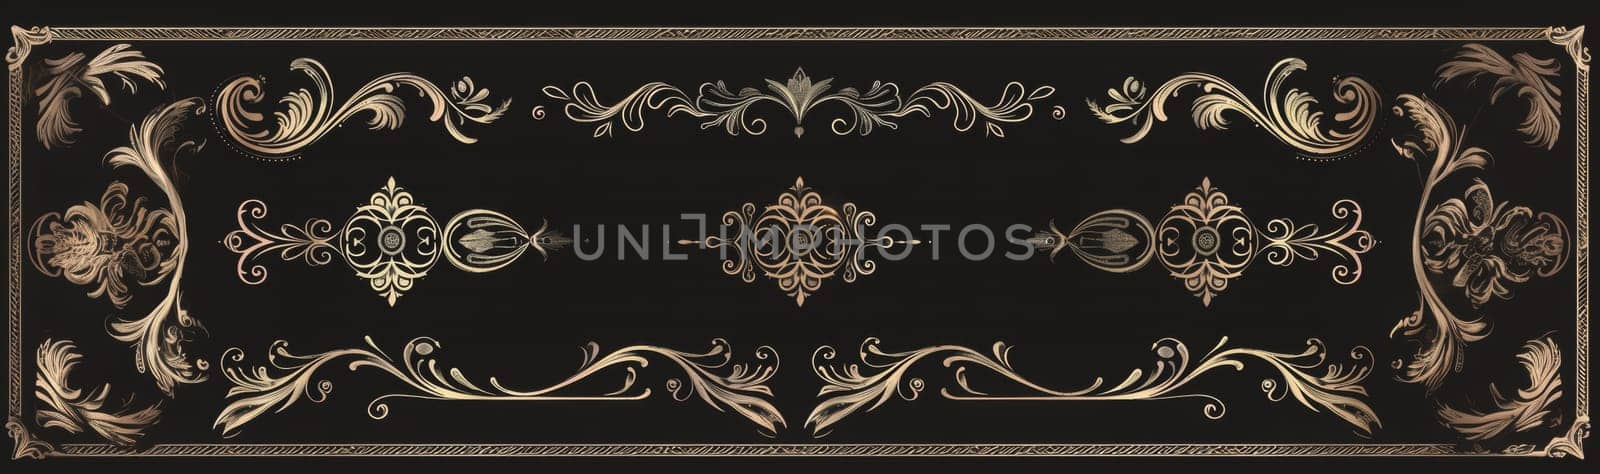 Elegant black and gold baroque frame with detailed floral patterns and designs on a dark background